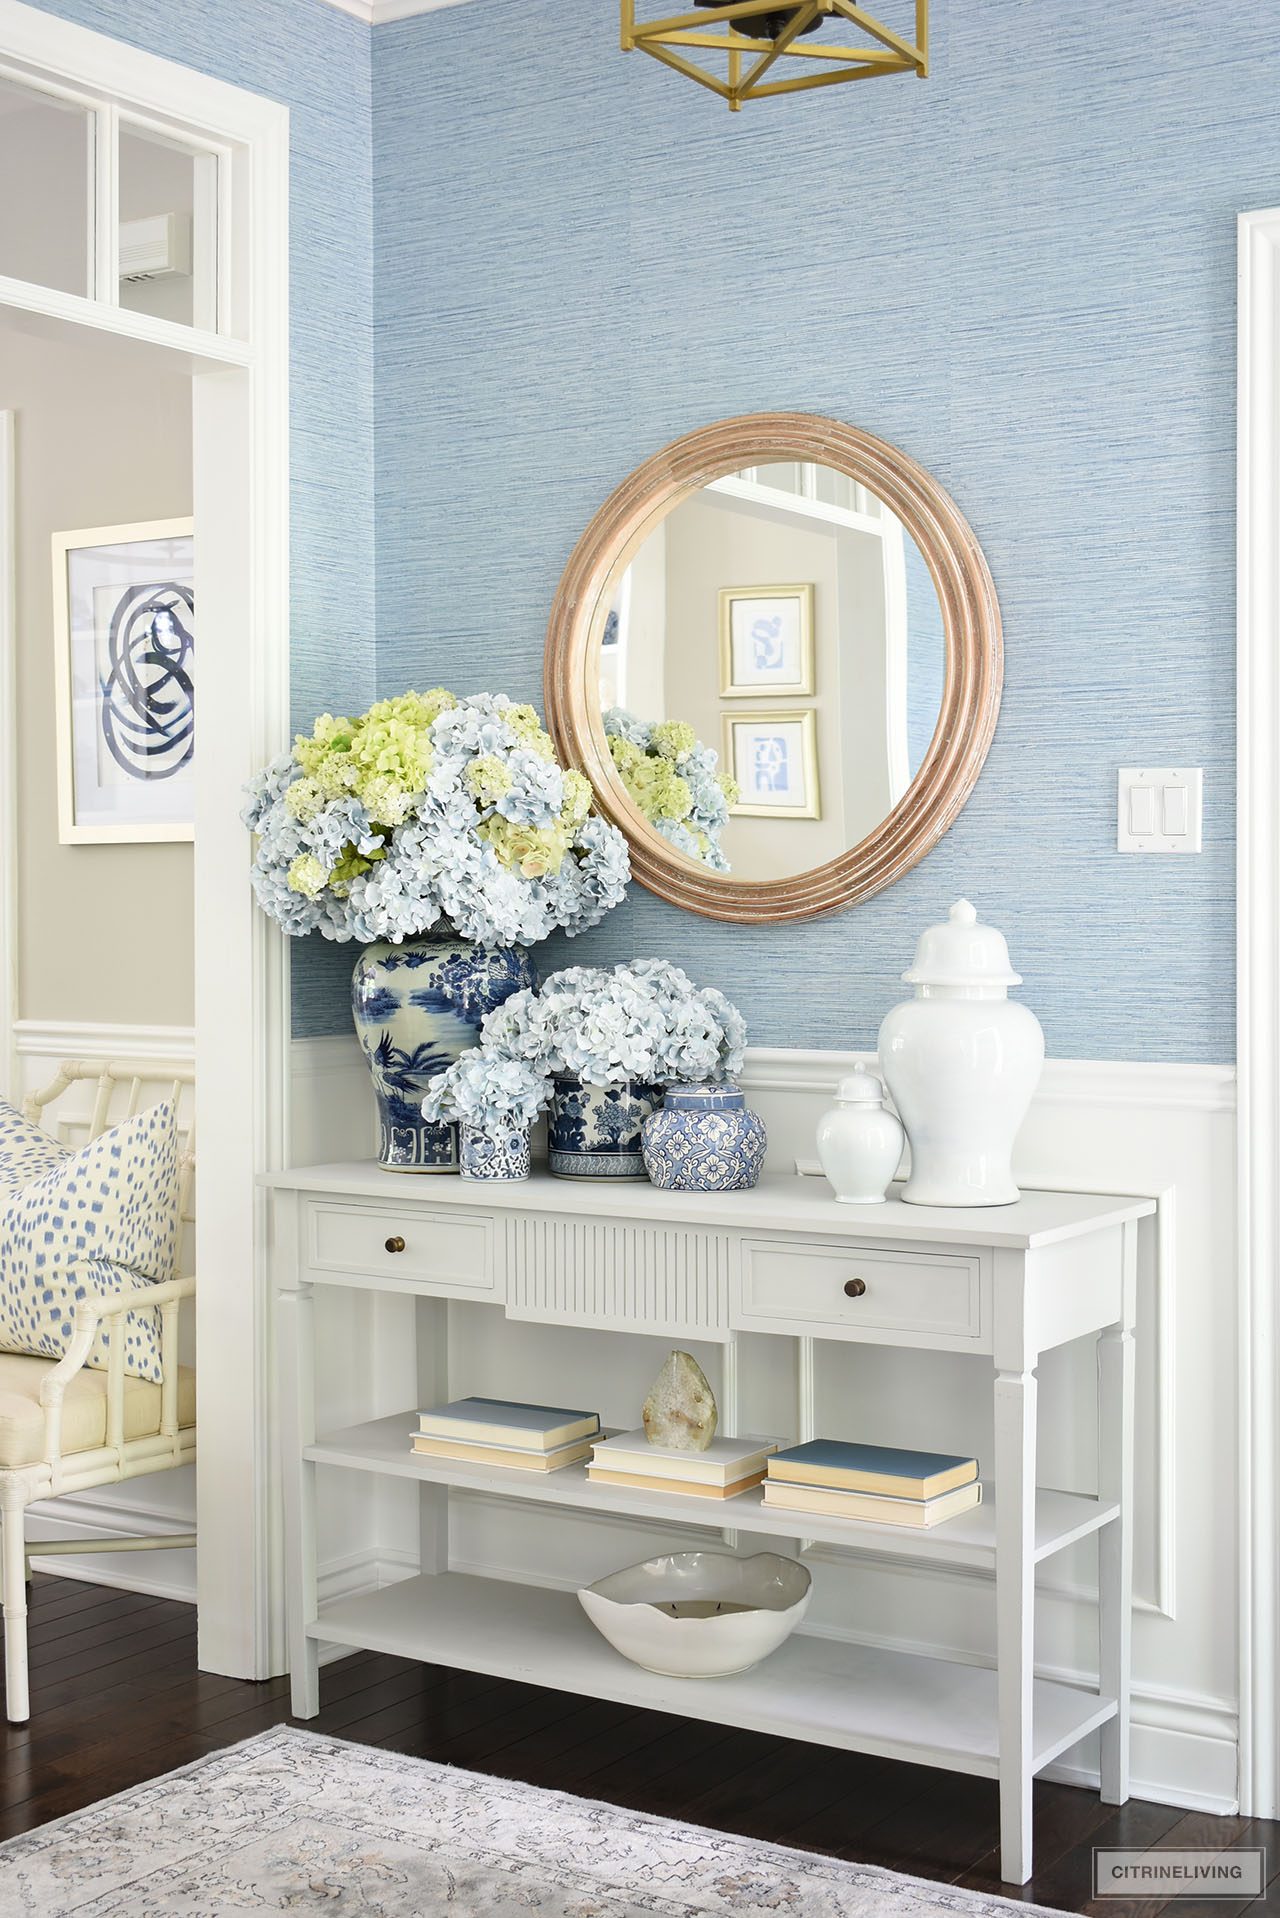 Entryway console table decorated in blue and white chinoiserie, ginger jars and simple accessories. A full, large floral arrangement with blue and green hyrdrangeas makes a stunning and bold statement.